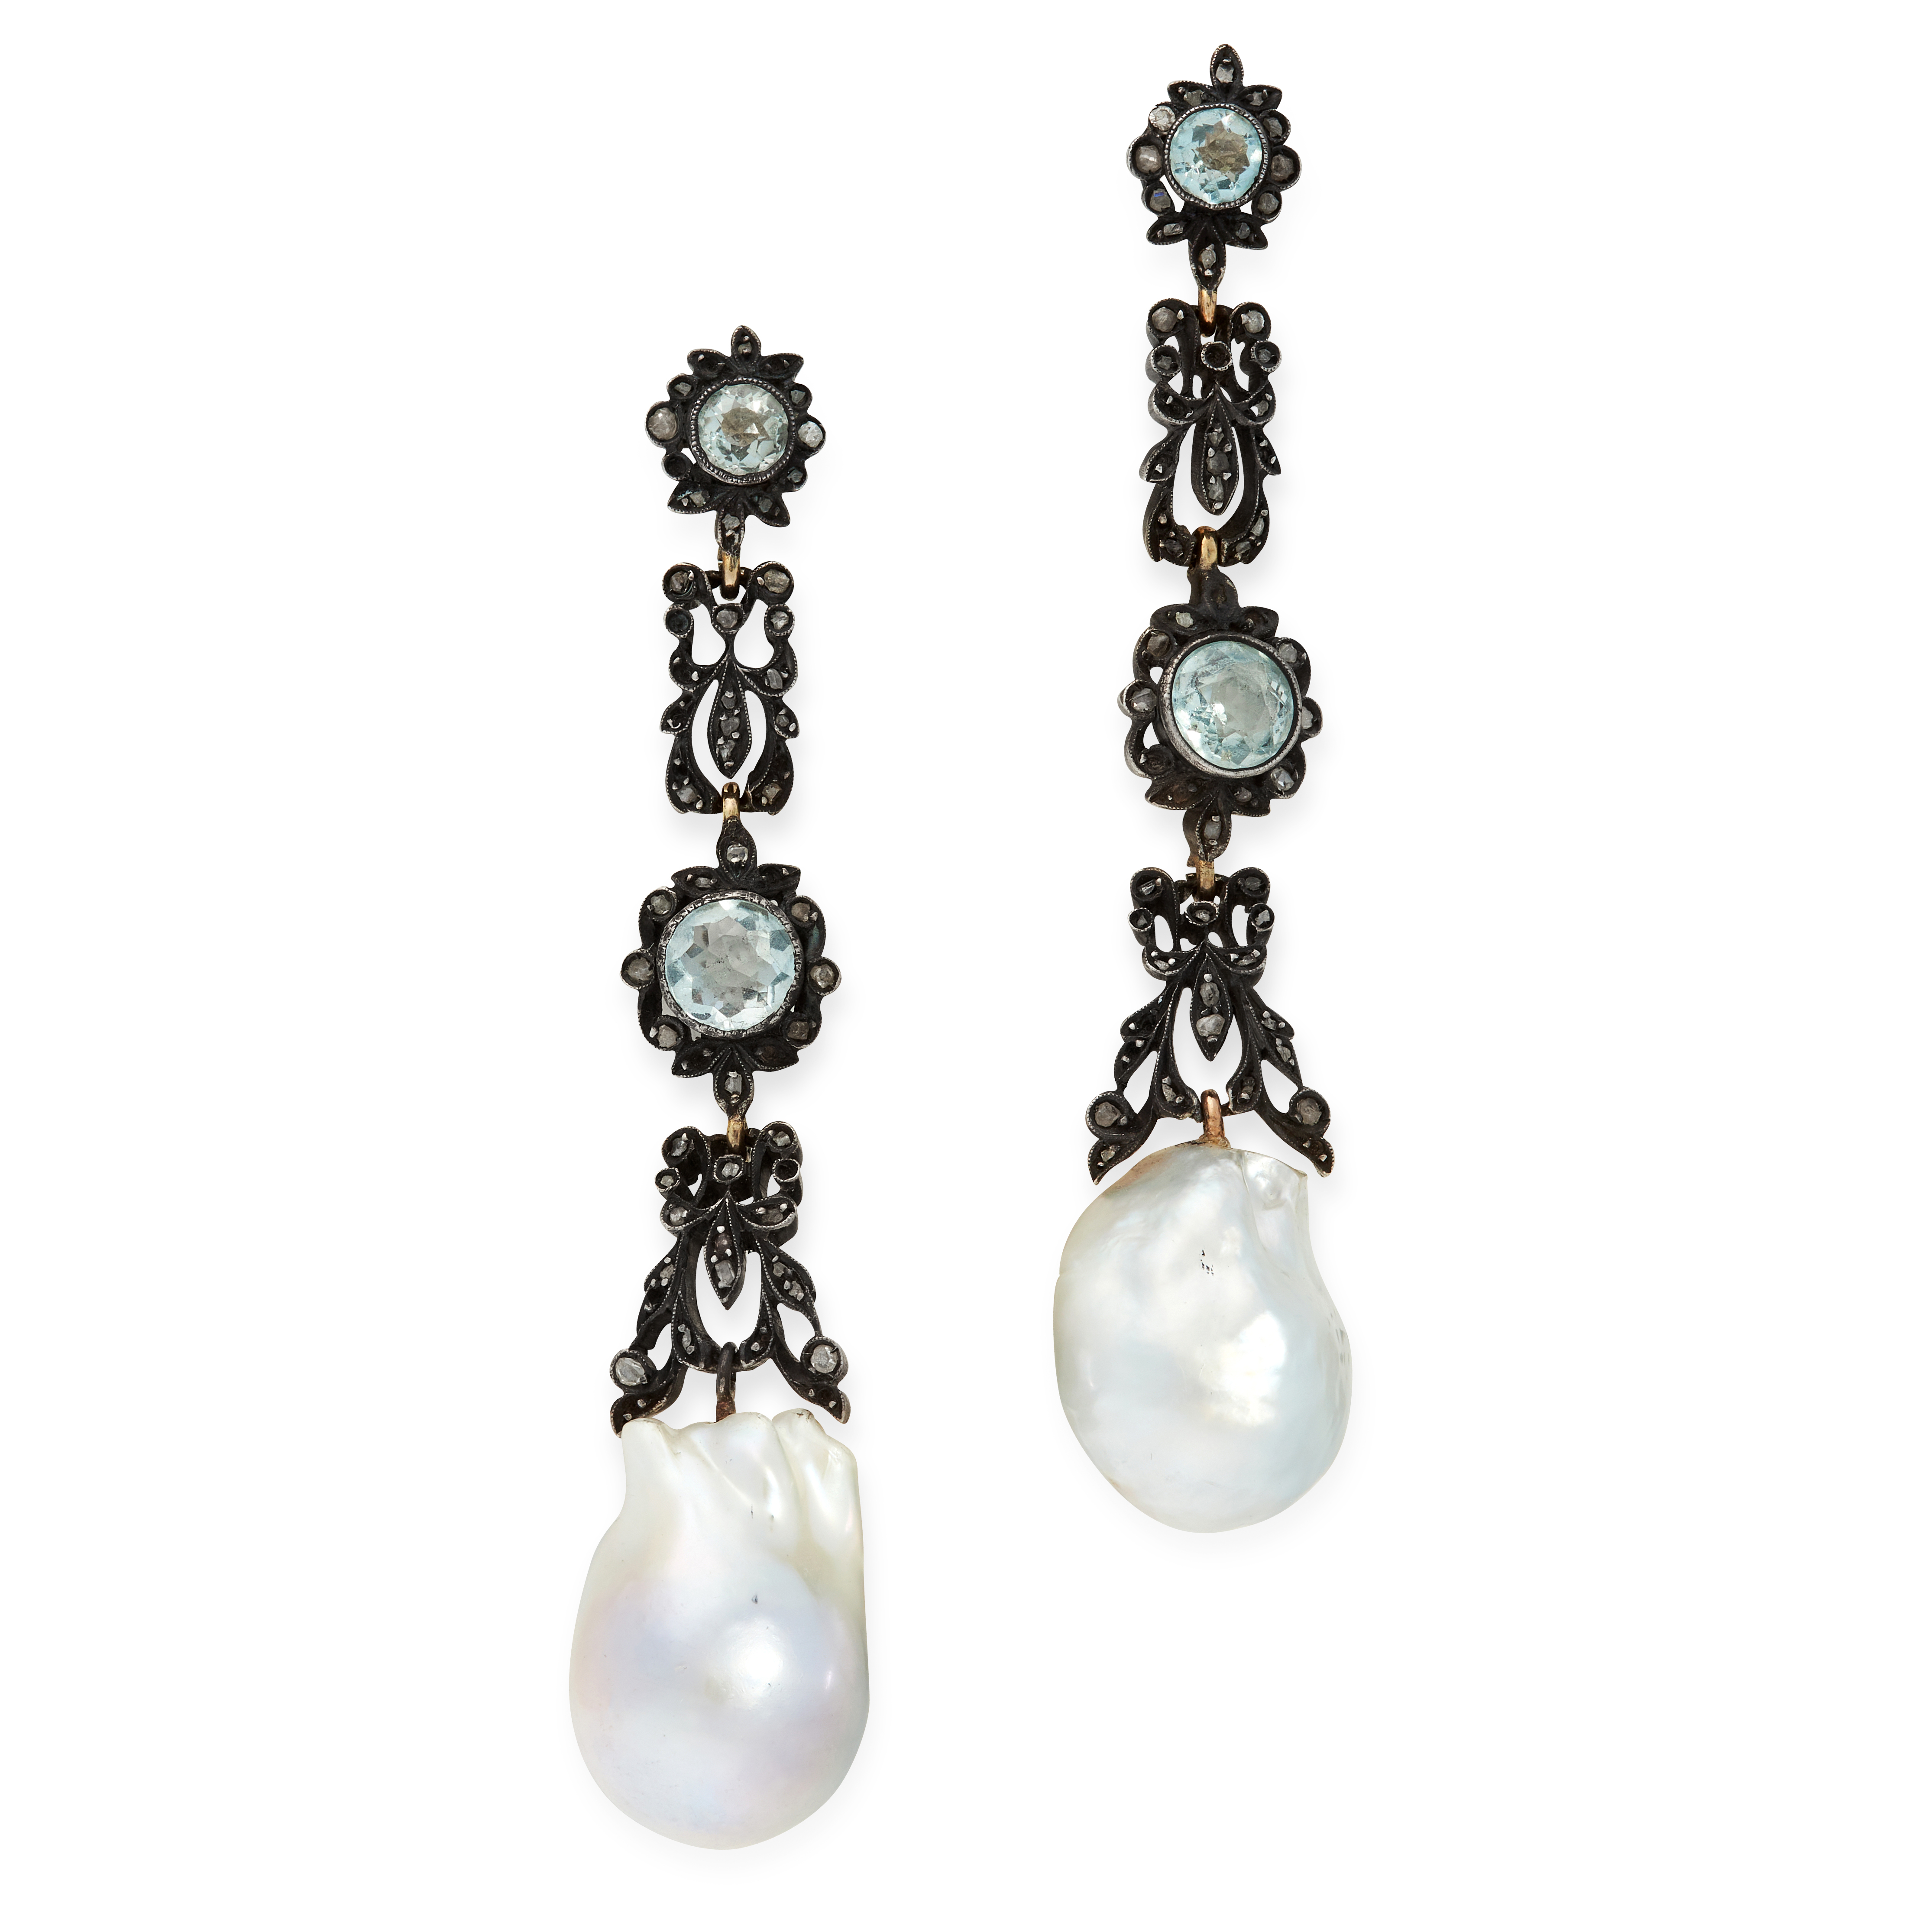 A PAIR OF PEARL, DIAMOND AND AQUAMARINE DROP EARRINGS in yellow gold and silver, each set with a